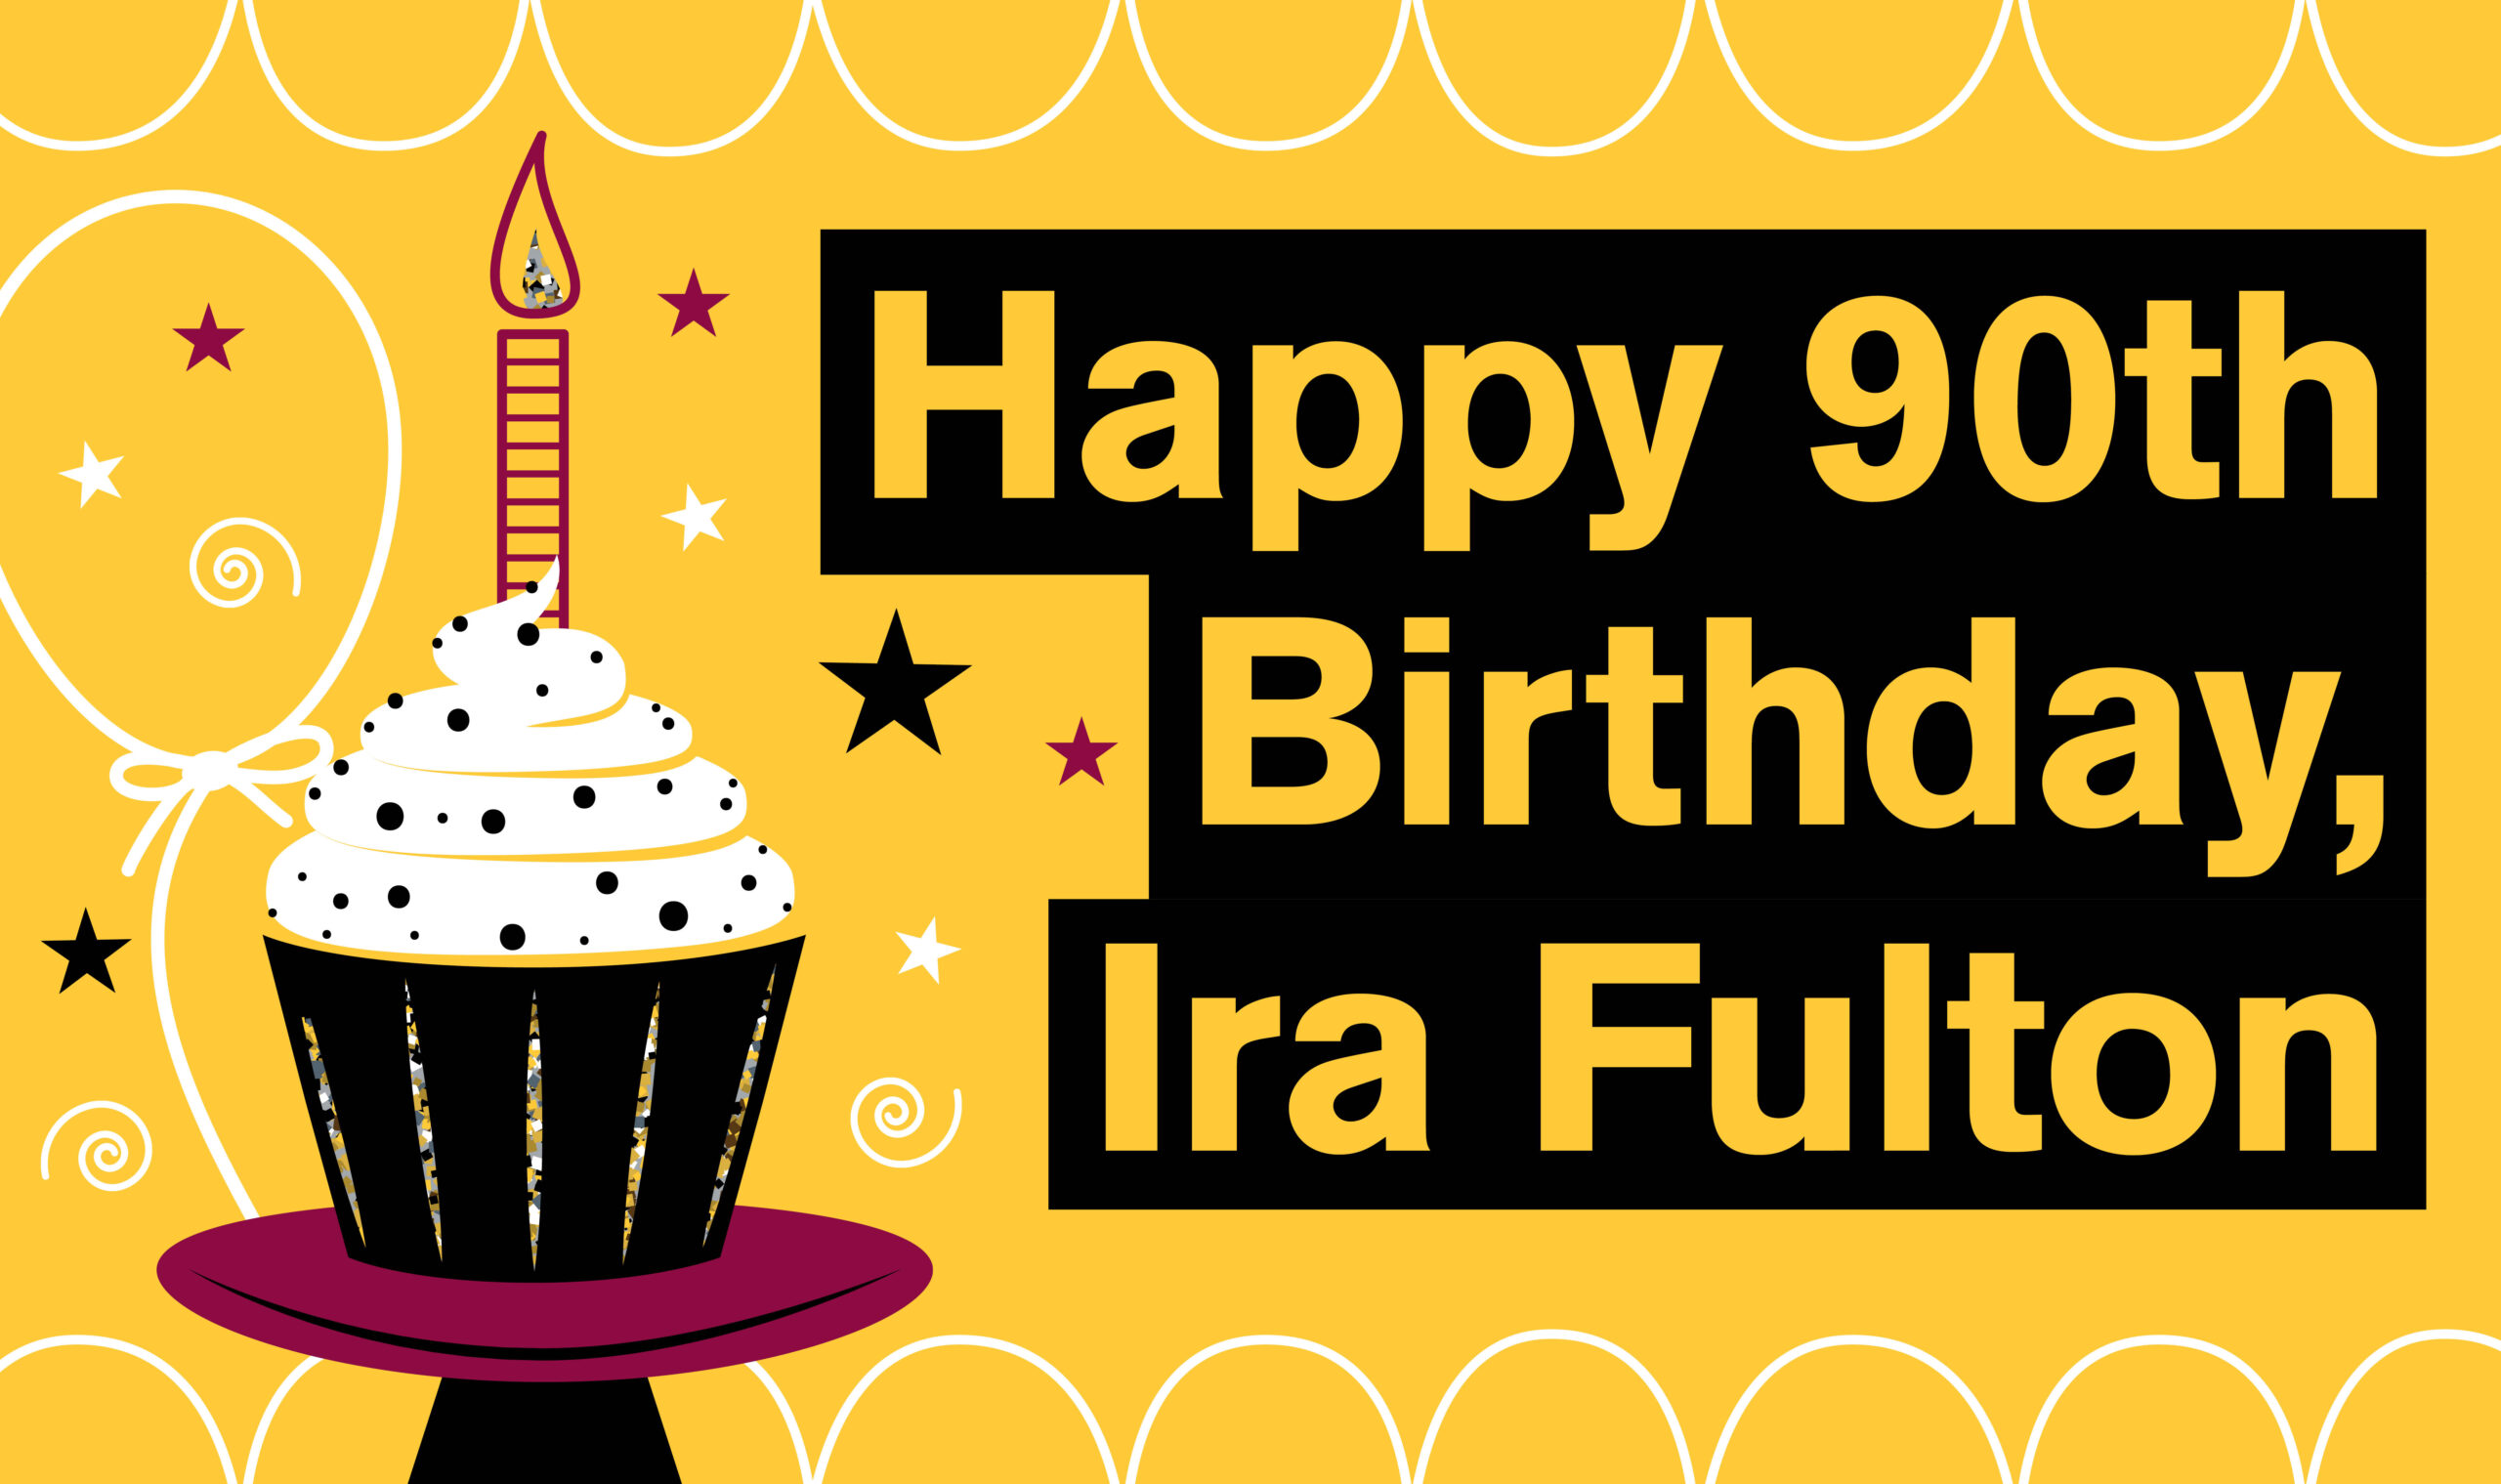 graphic of a cupcake and text that says "Happy 90th birthday, Ira Fulton"